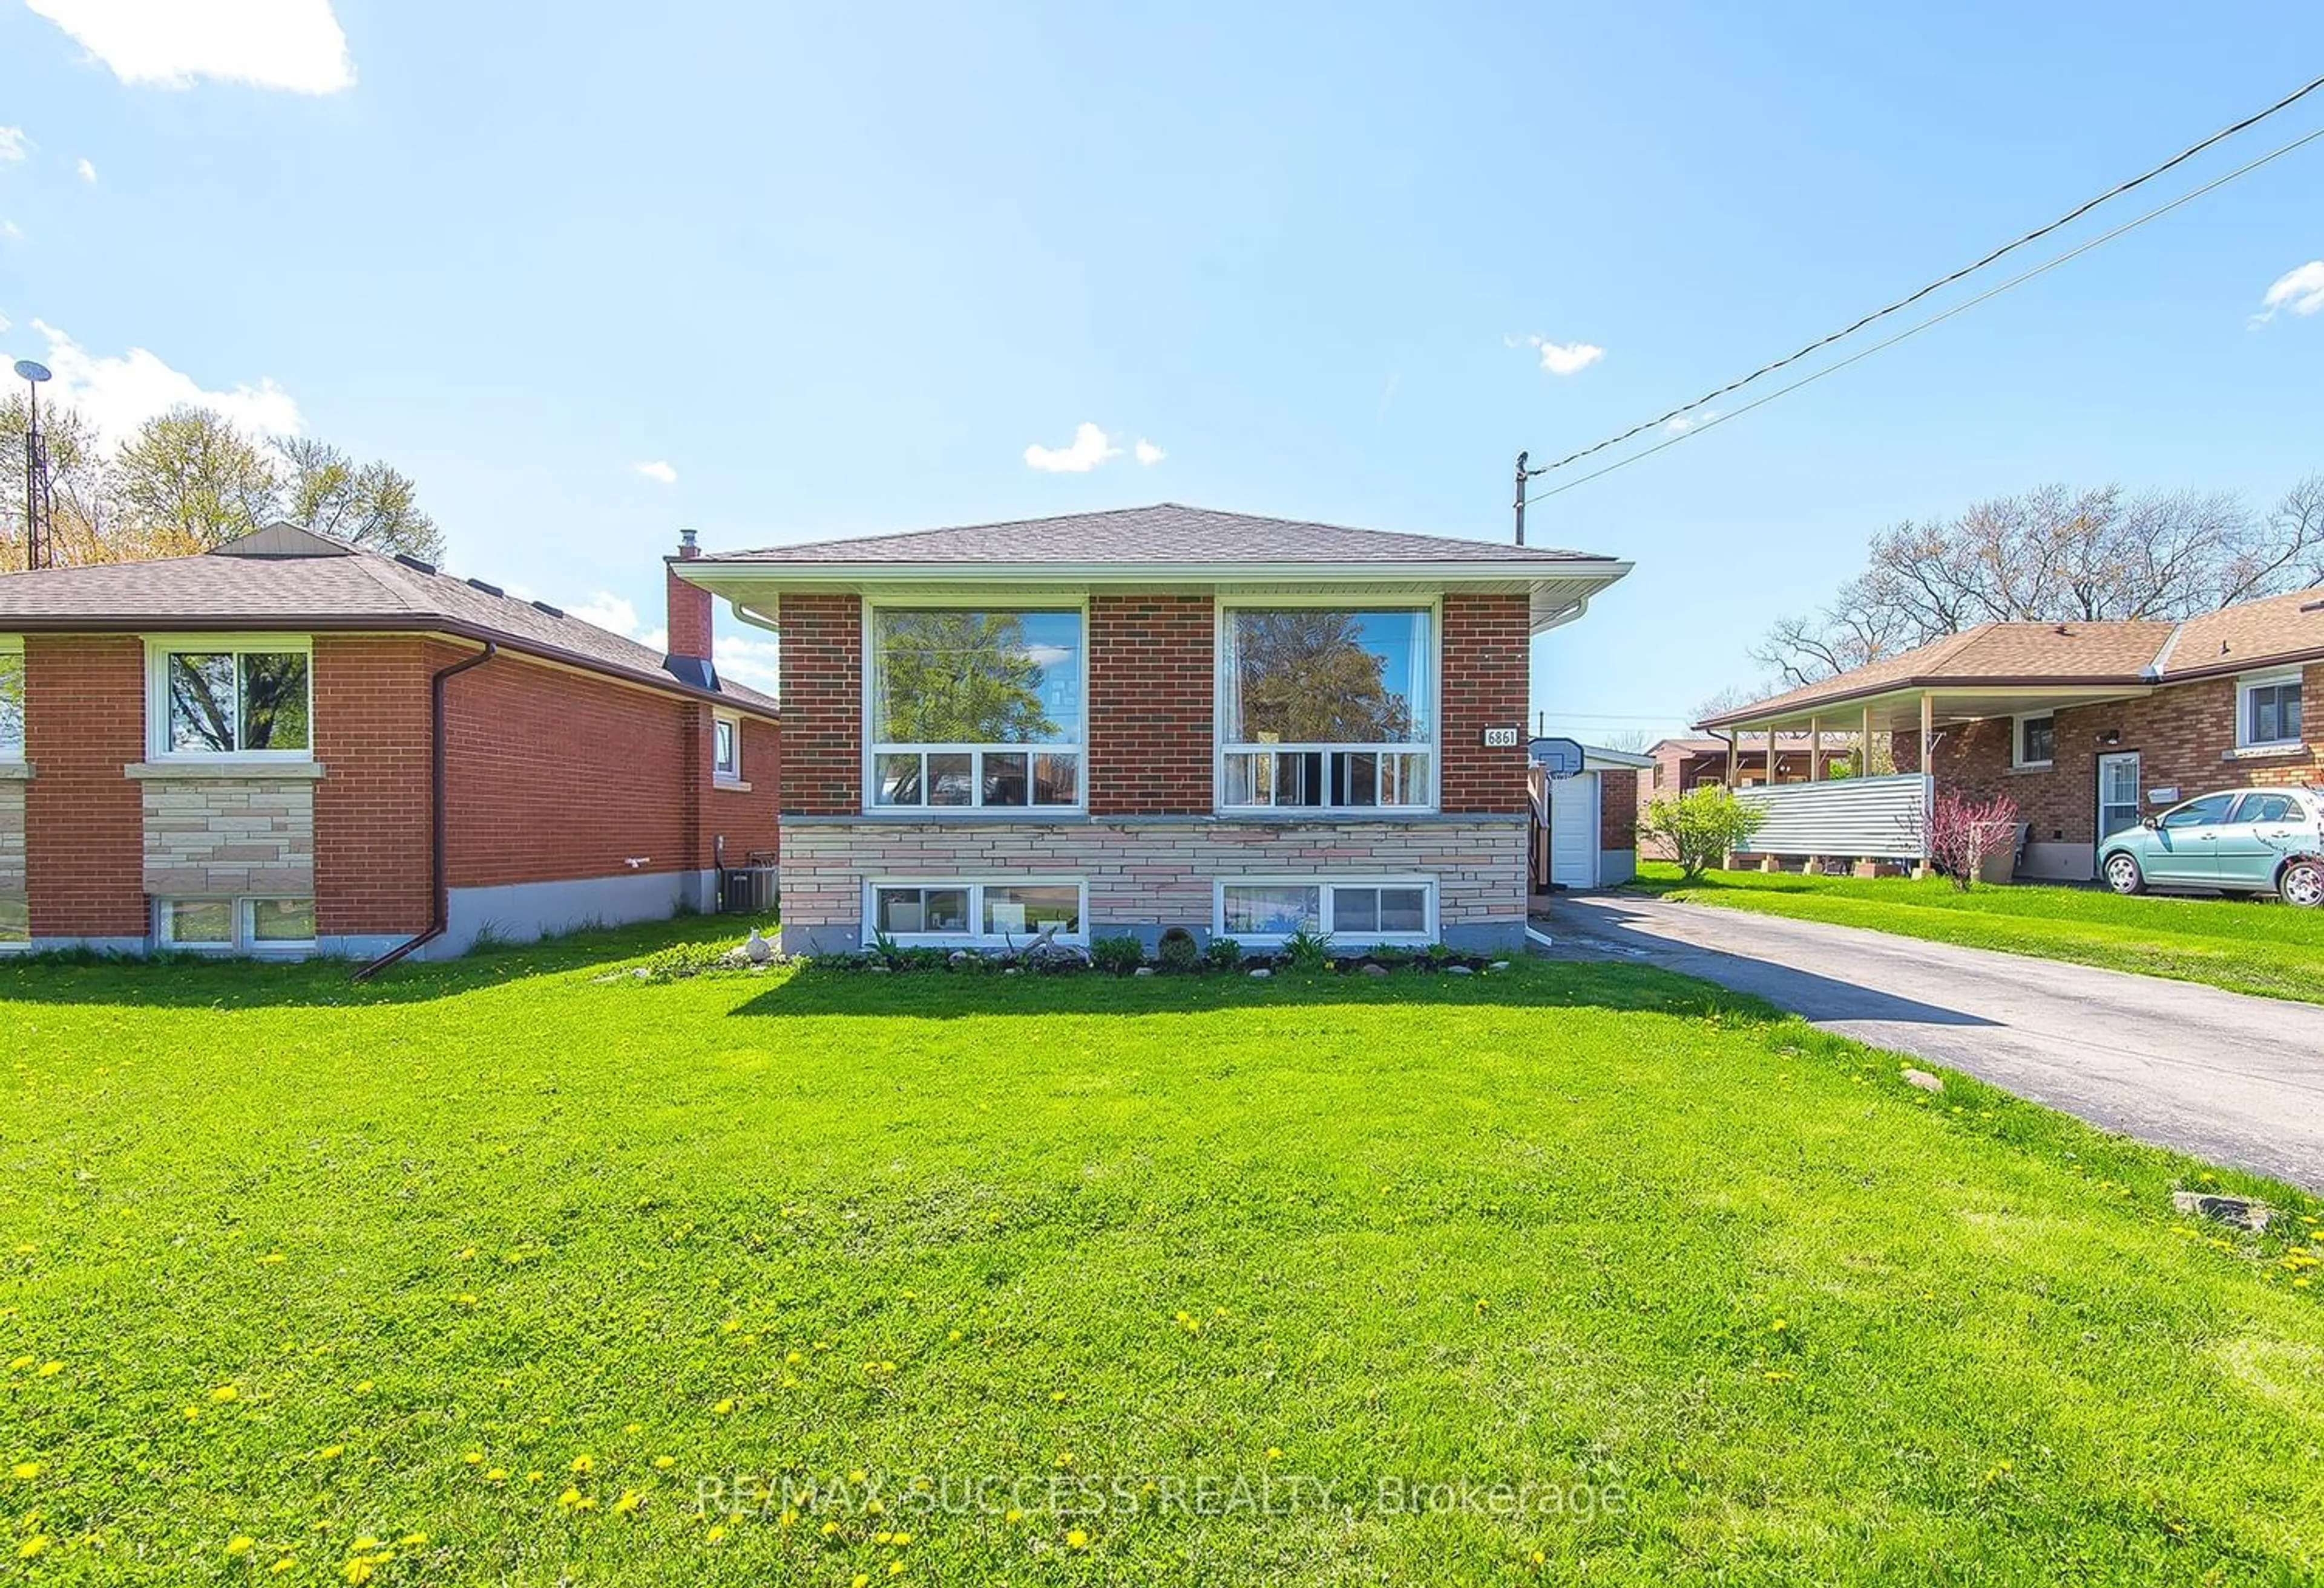 Frontside or backside of a home for 6861 Hagar Ave, Niagara Falls Ontario L2G 5M6